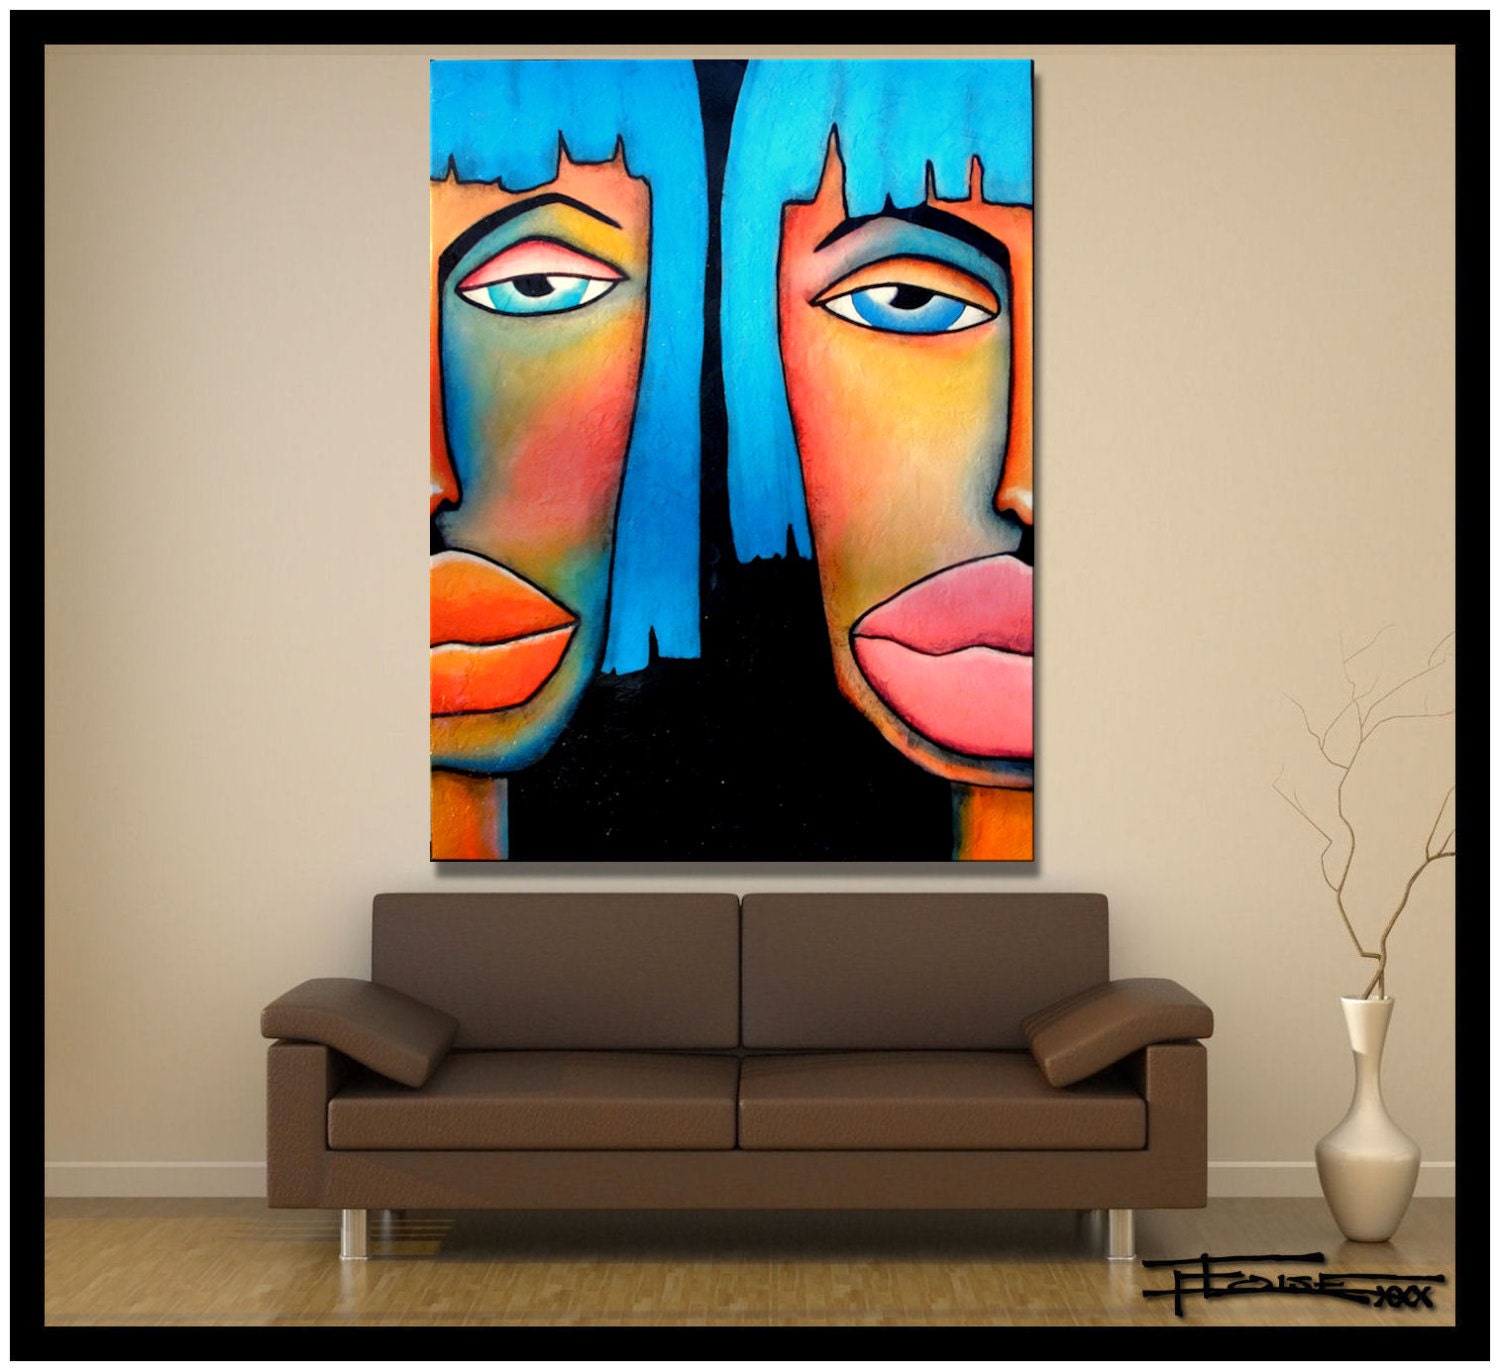  Modern Abstract Canvas Painting XL 48 X 36 X 1.5, Limited  Edition Hand Embellished, Textured Giclee on Canvas. Direct from top  Selling U.S. Artist - ELOISExxx: Oil Paintings: Posters & Prints